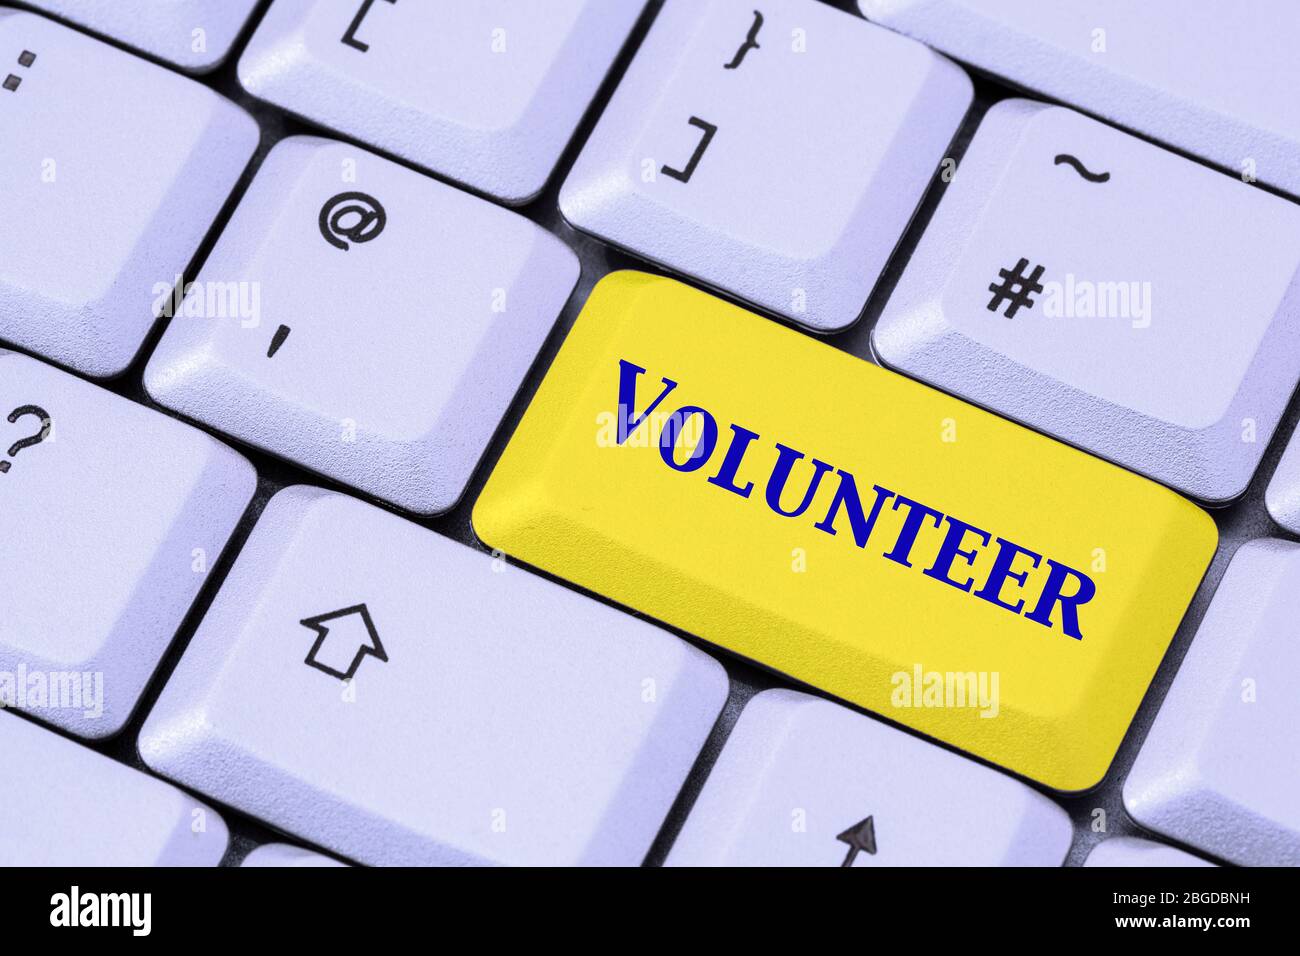 A keyboard with the word VOLUNTEER in blue lettering on a yellow enter key. Volunteering concept. England, UK, Britain Stock Photo